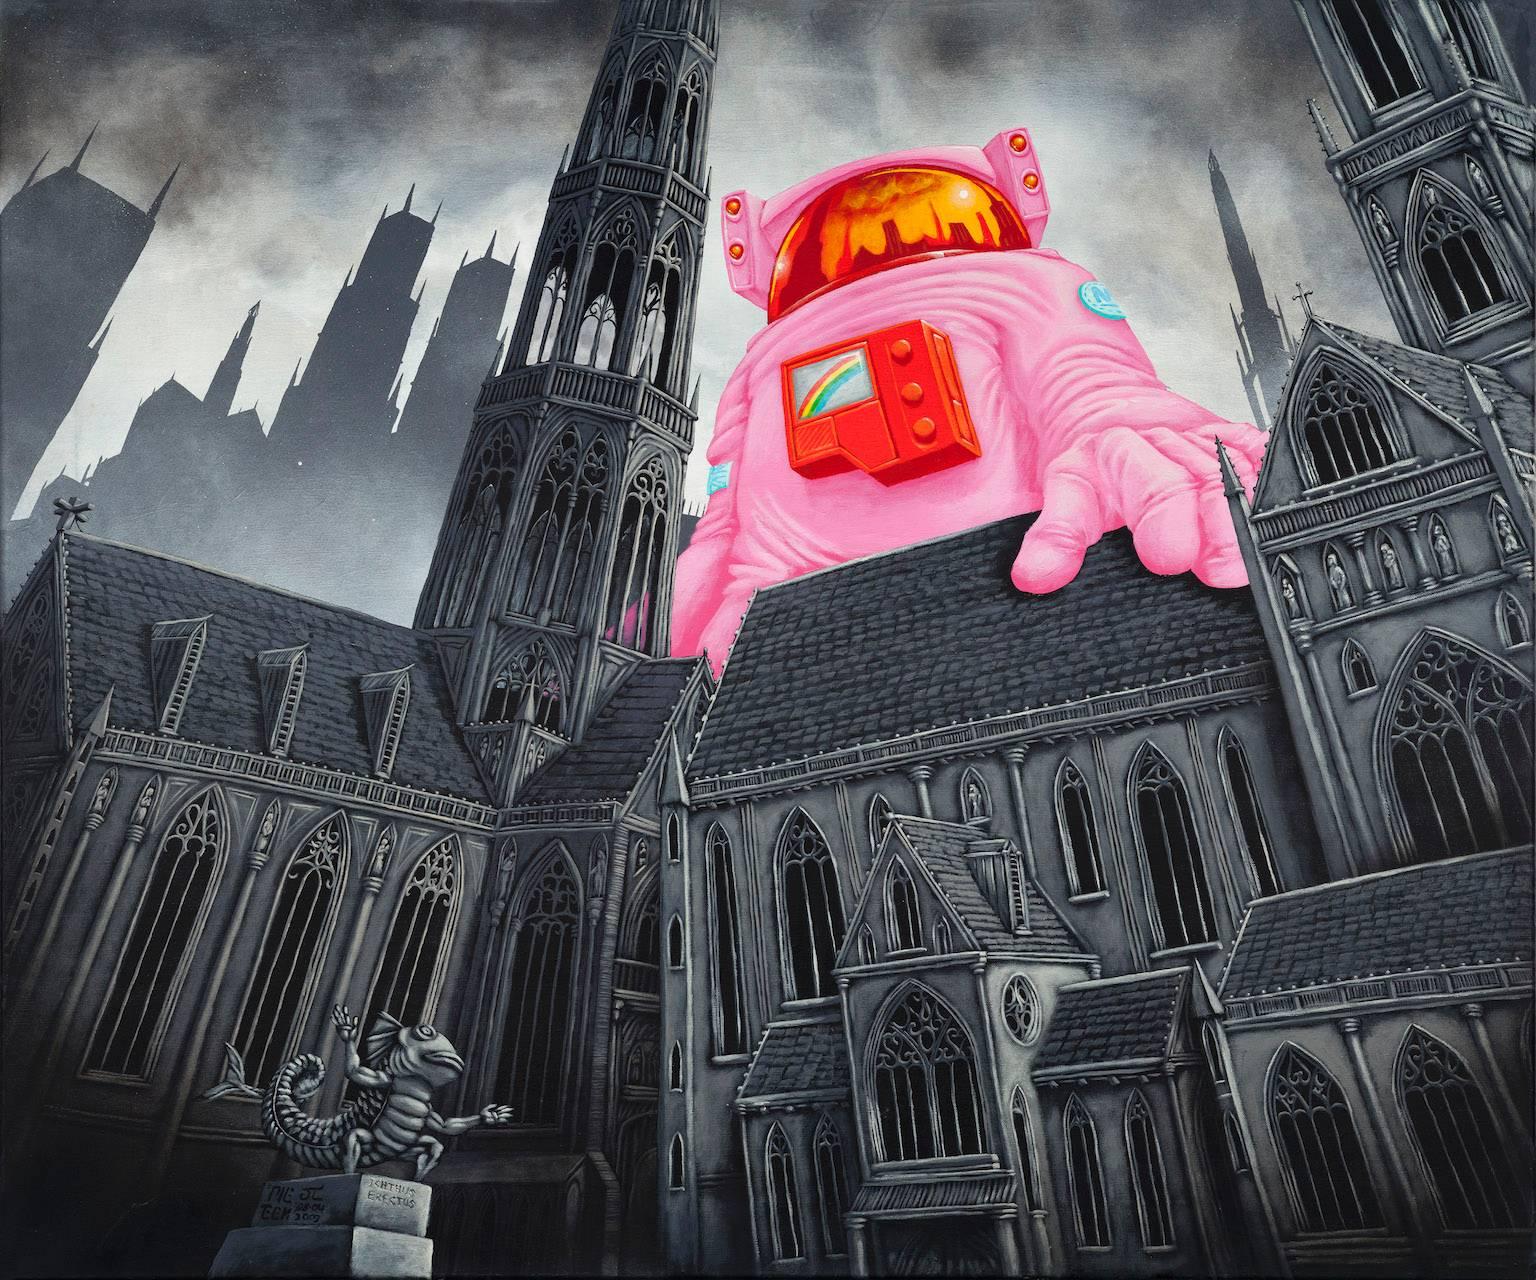 "Goodzilla" is a unique work by Dutch artist Pieter Borst and is considered a true masterpiece from the artists oeuvre.

The work was created by the artist in his studio in Haarlem, The Netherlands, in 2009. The artist used mainly brush work using